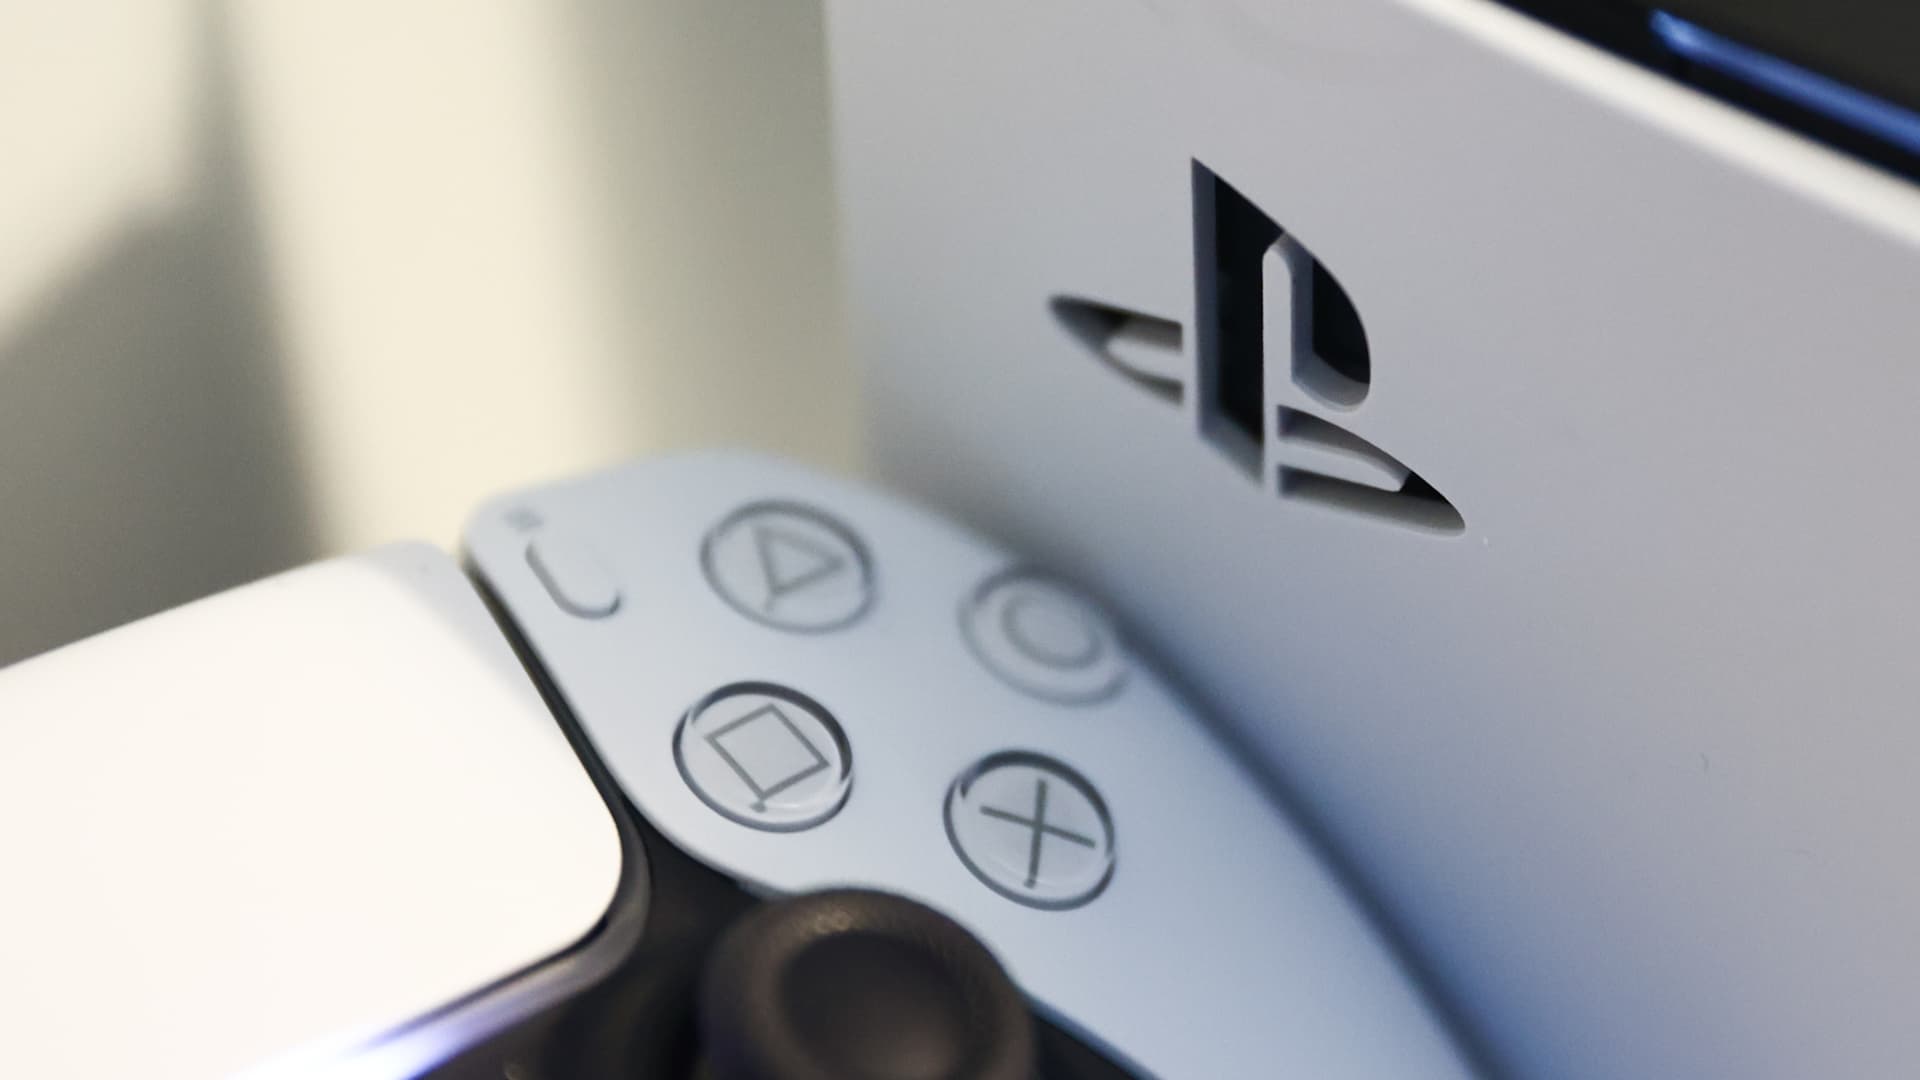 Sony reports 7% drop in annual profit as PlayStation 5 sales miss trimmed target